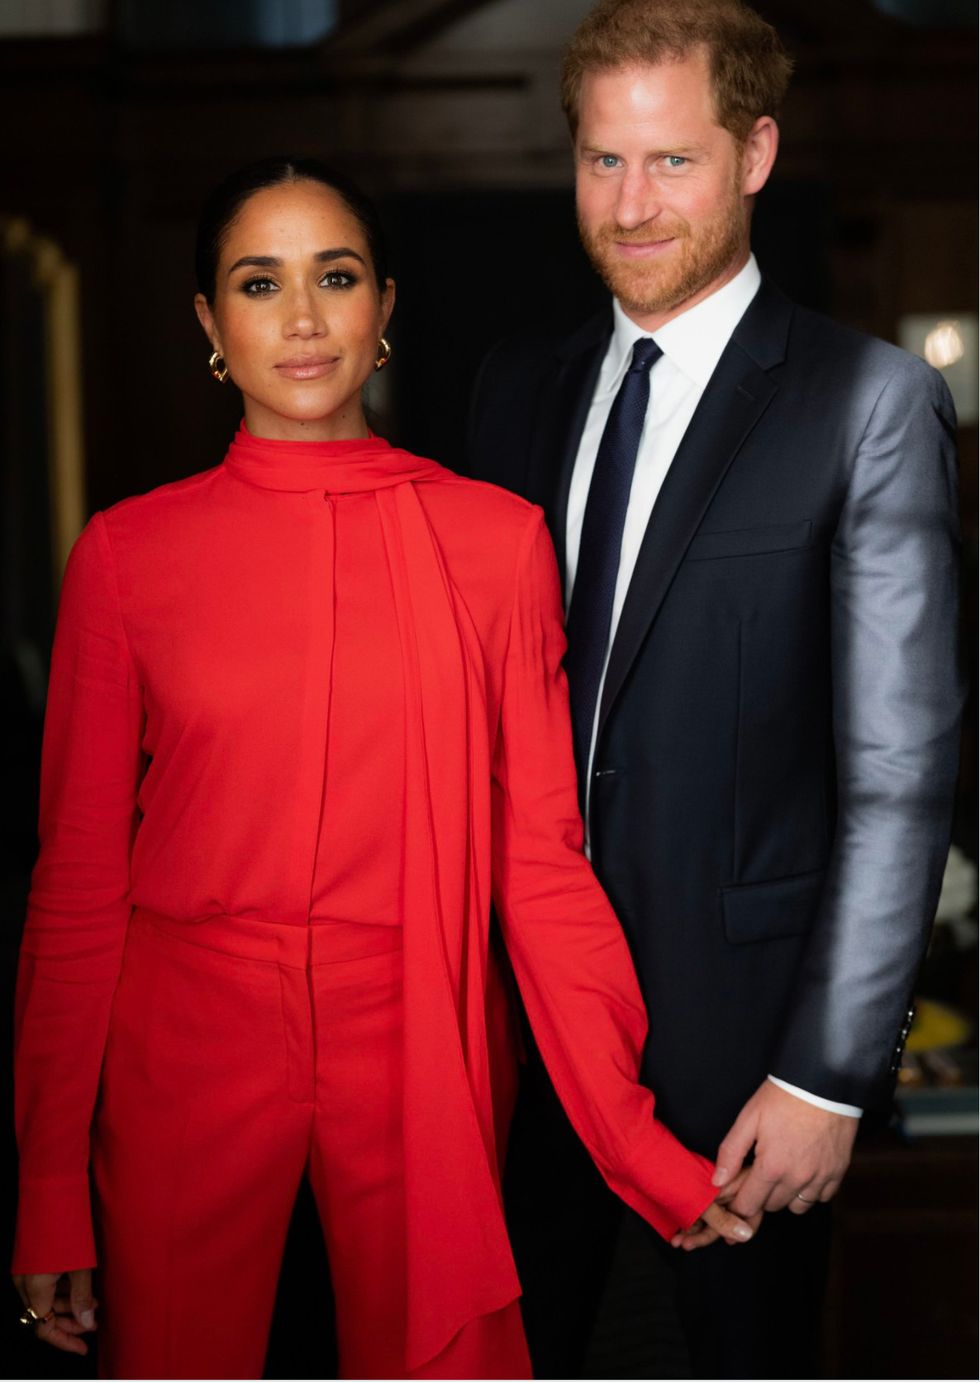 Meghan Markle and Prince Harry release new pictures of themselves - days after Royal Family release official portrait